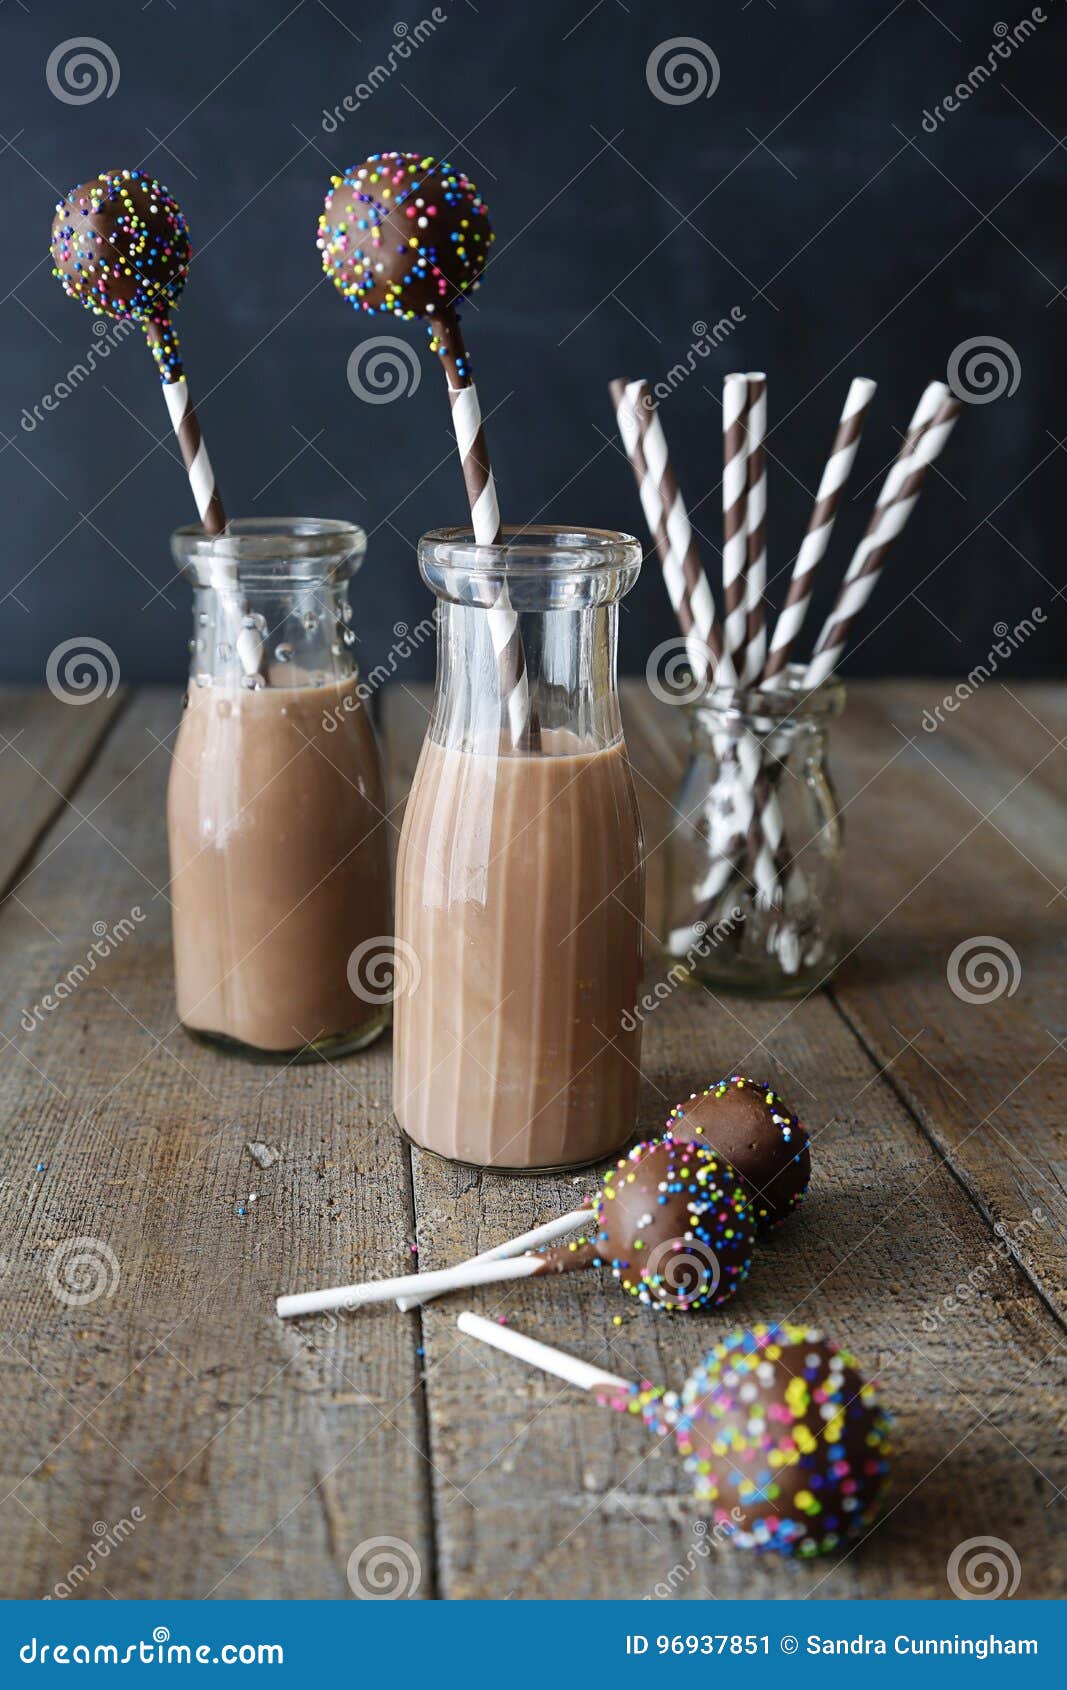 Bottles of Chocolate Milk with Cake Pops Stock Image - Image of food ...